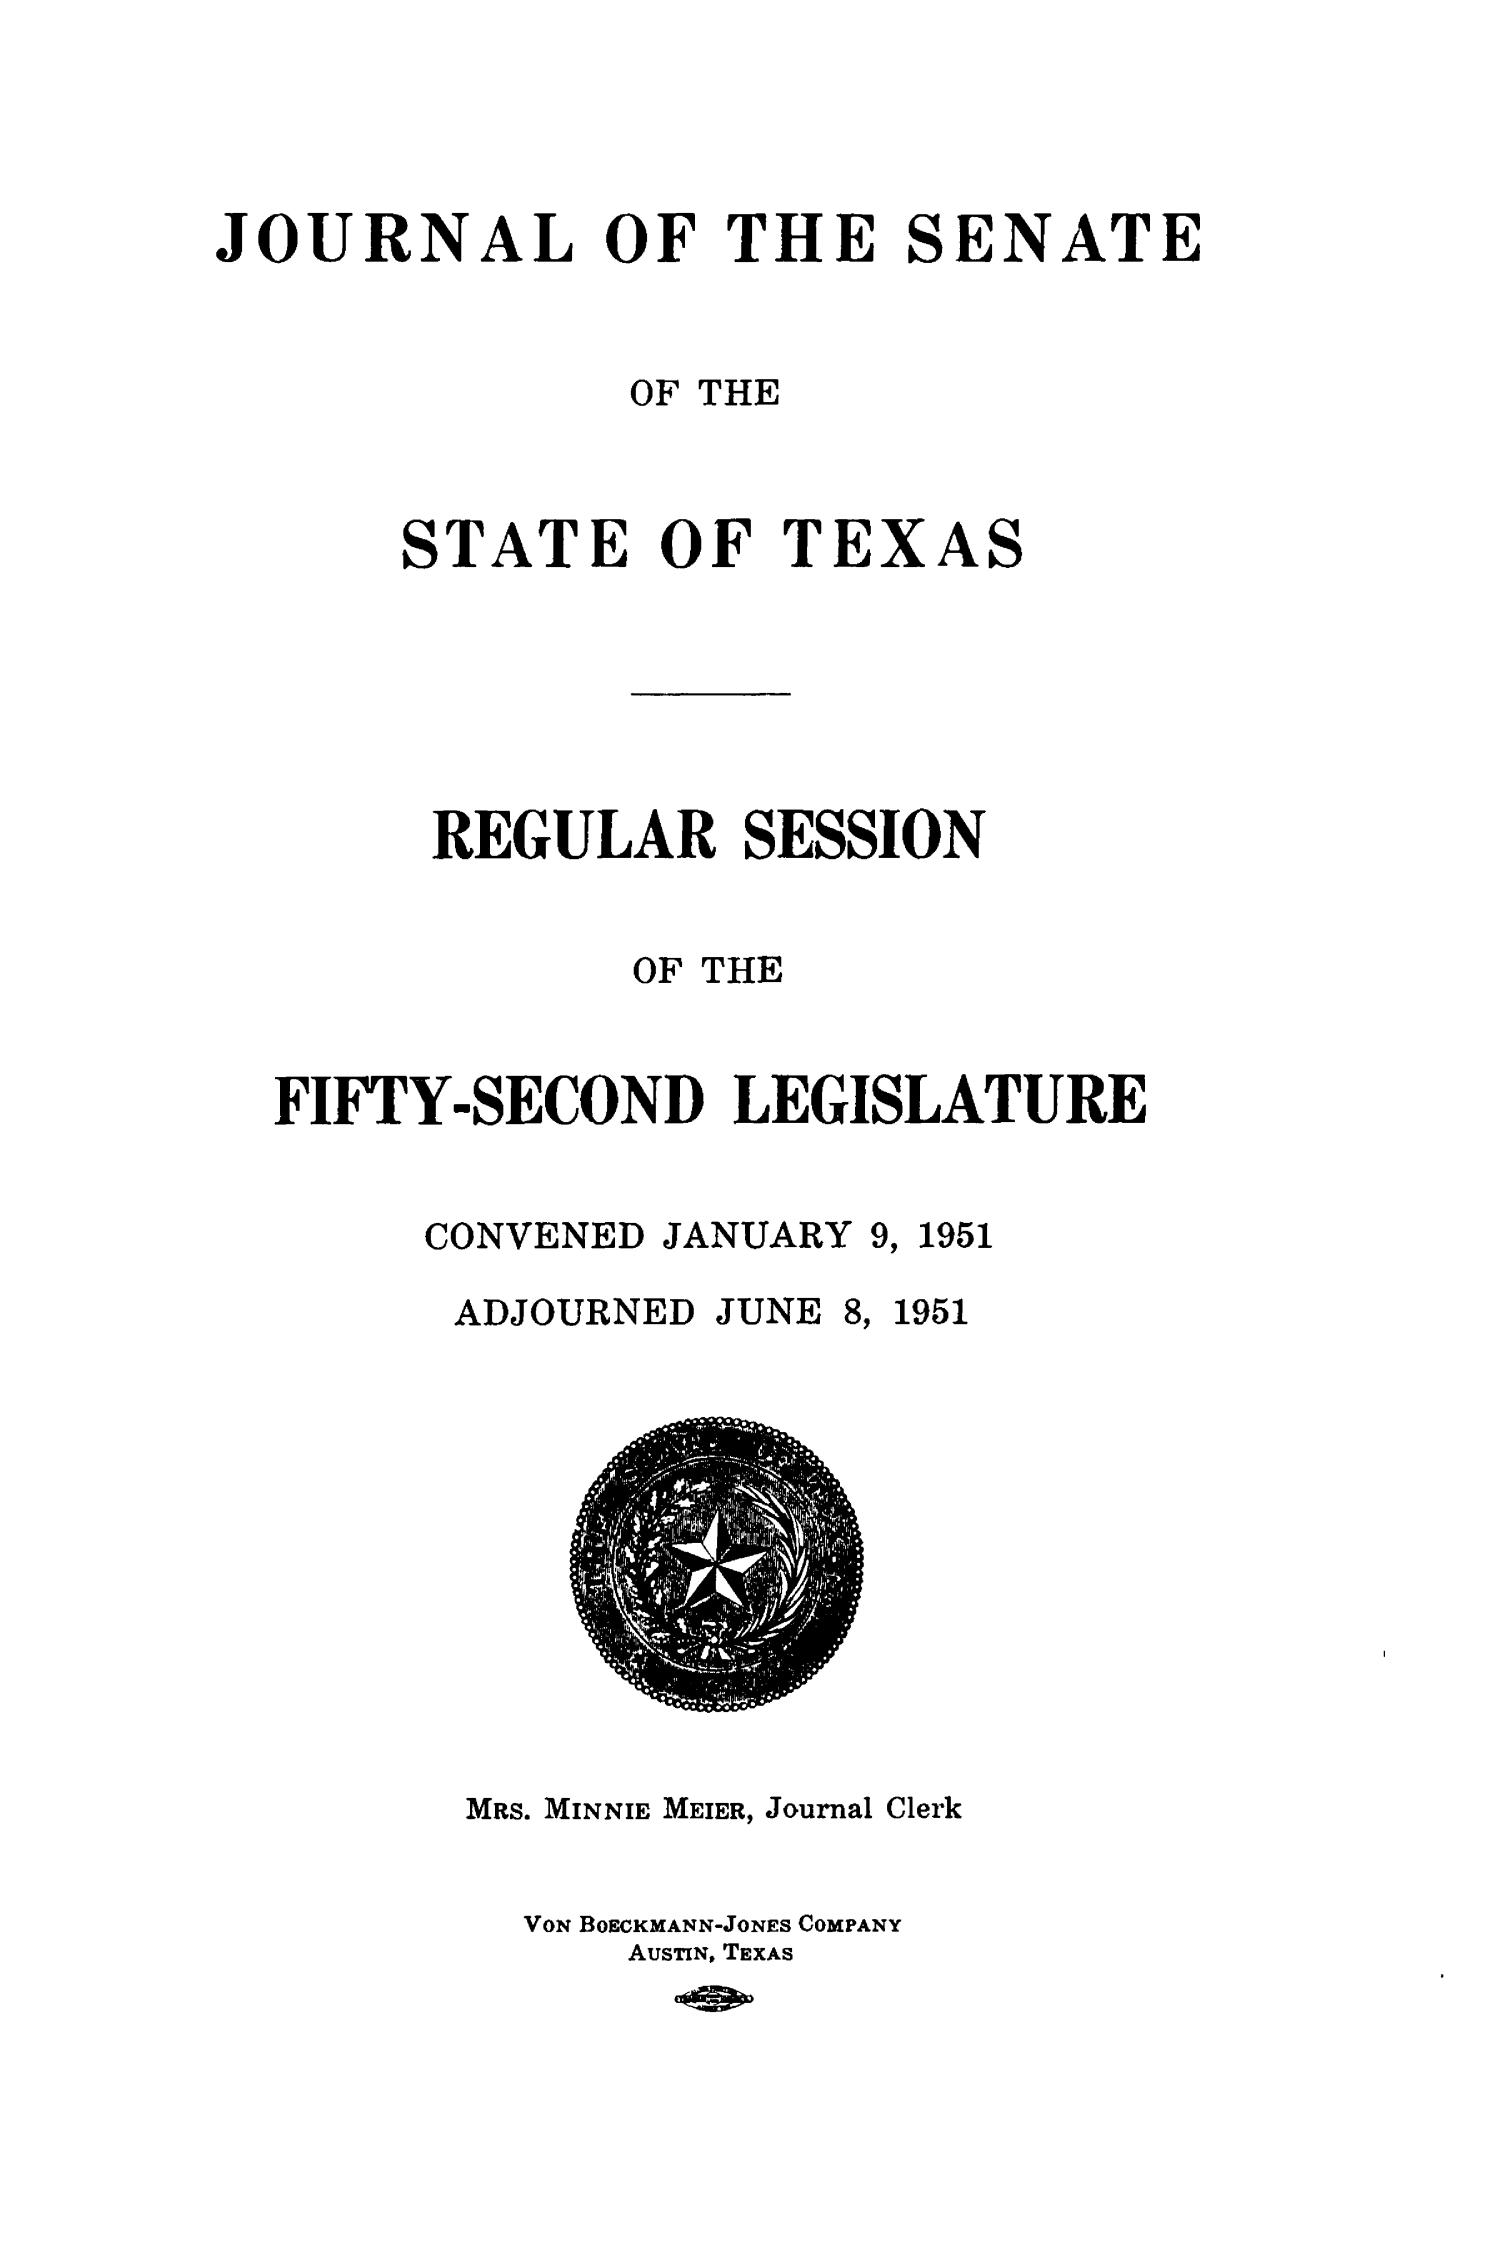 Journal of the Senate of the State of Texas, Regular Session of the Fifty-Second Legislature
                                                
                                                    Title Page
                                                